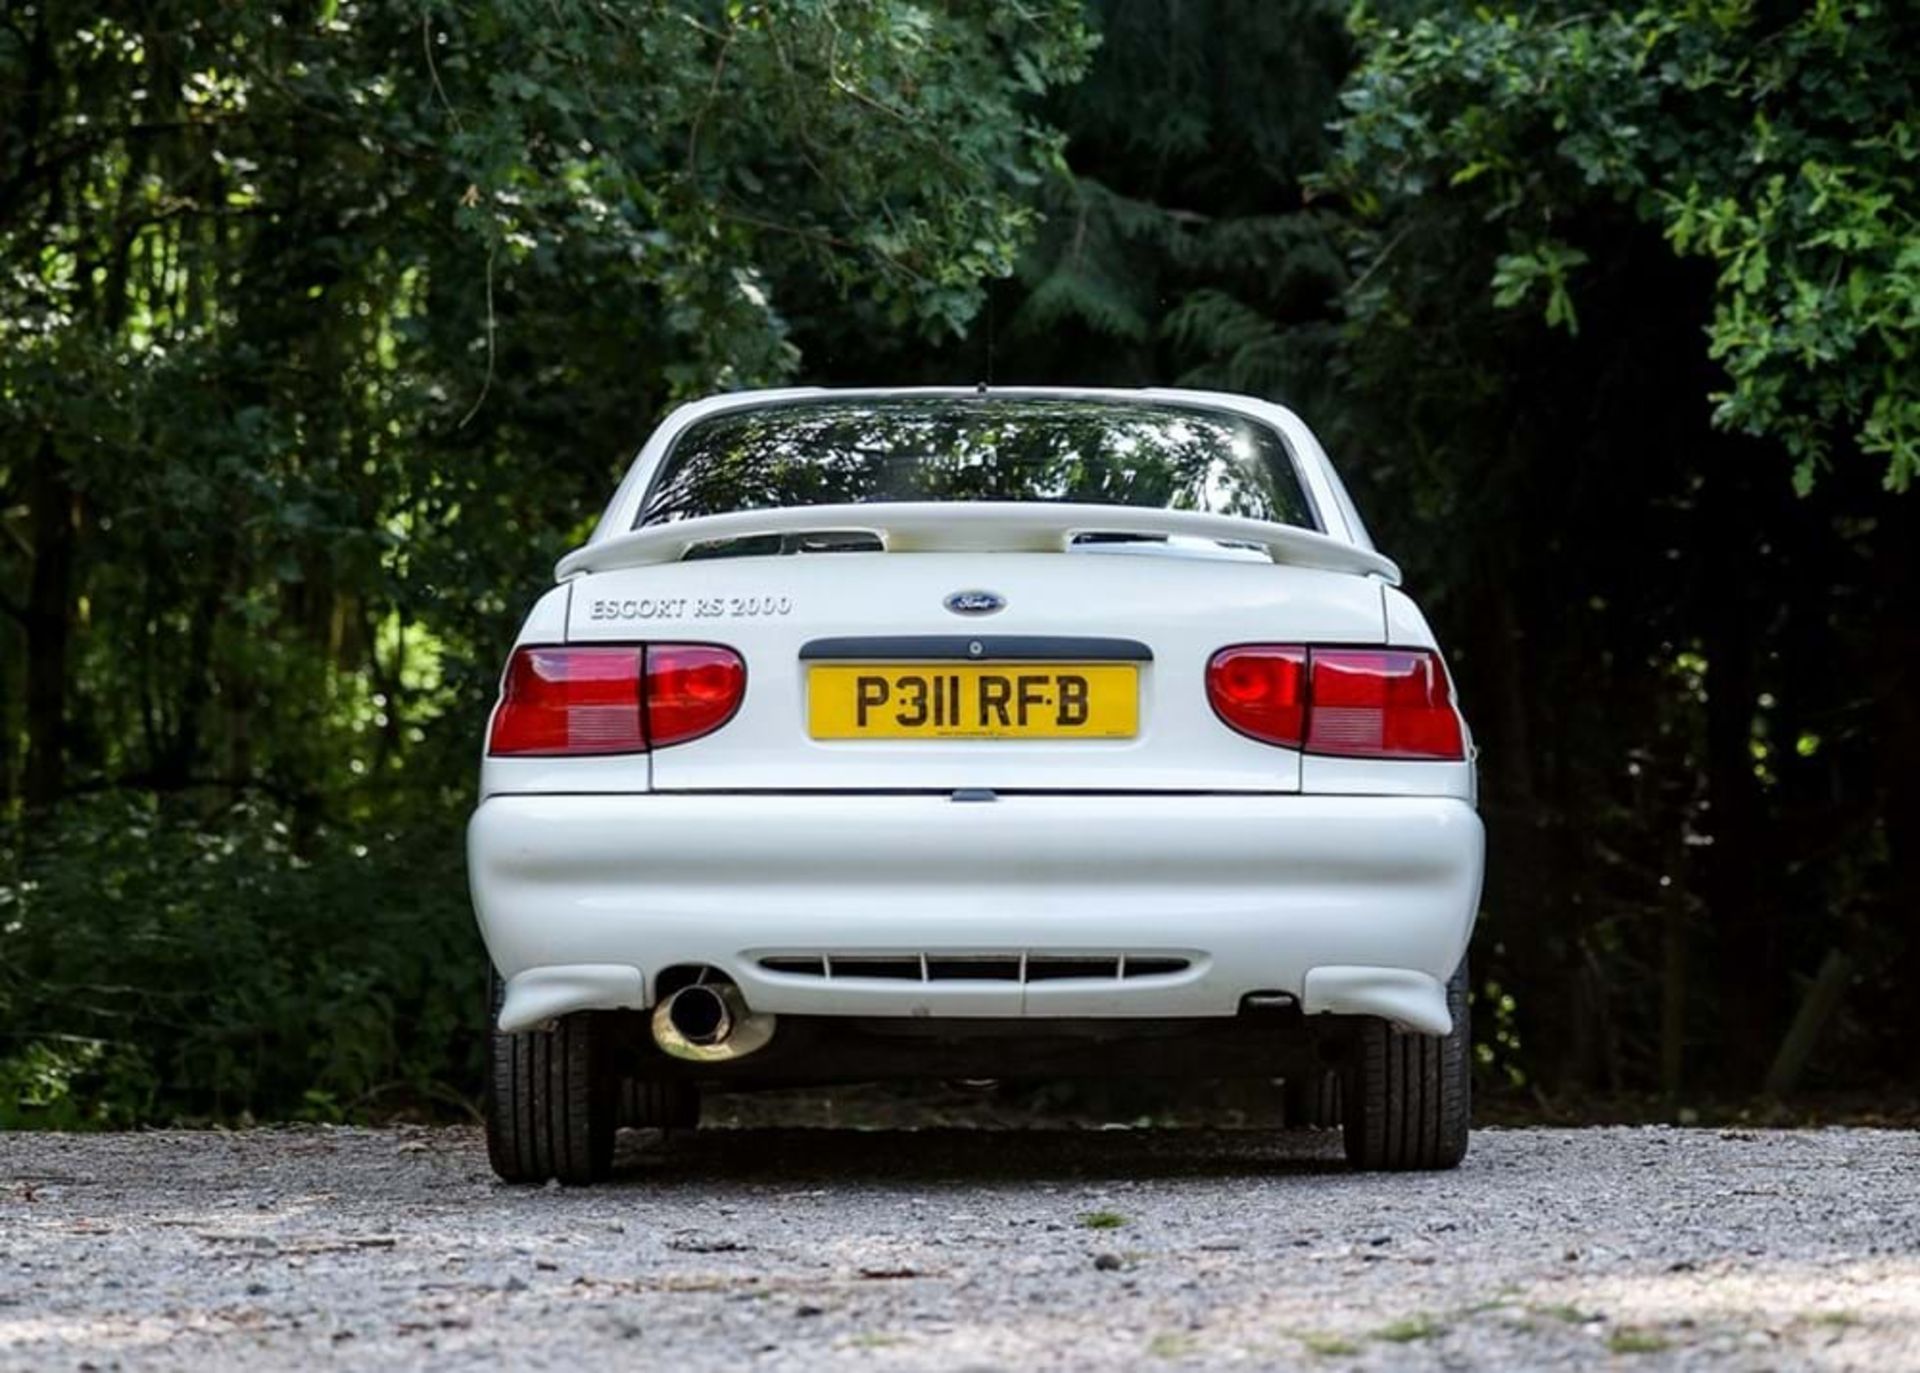 1996 Ford Escort RS2000 - Image 9 of 10